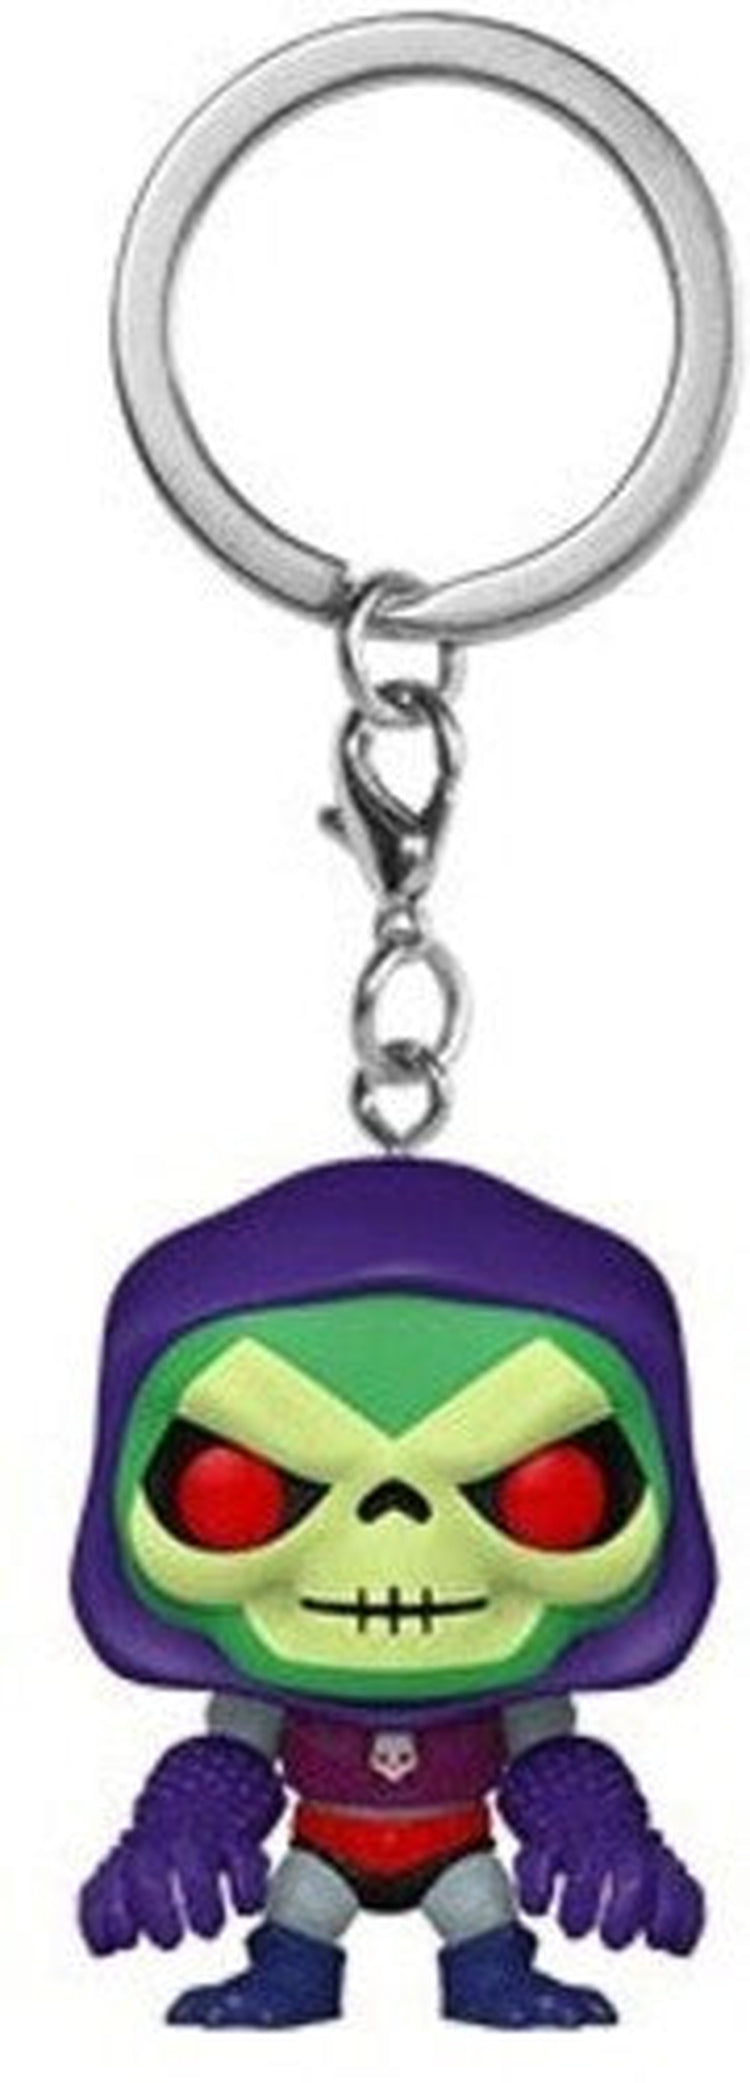 FUNKO POP! KEYCHAIN: Masters of the Universe - Skeletor with Terror Claws